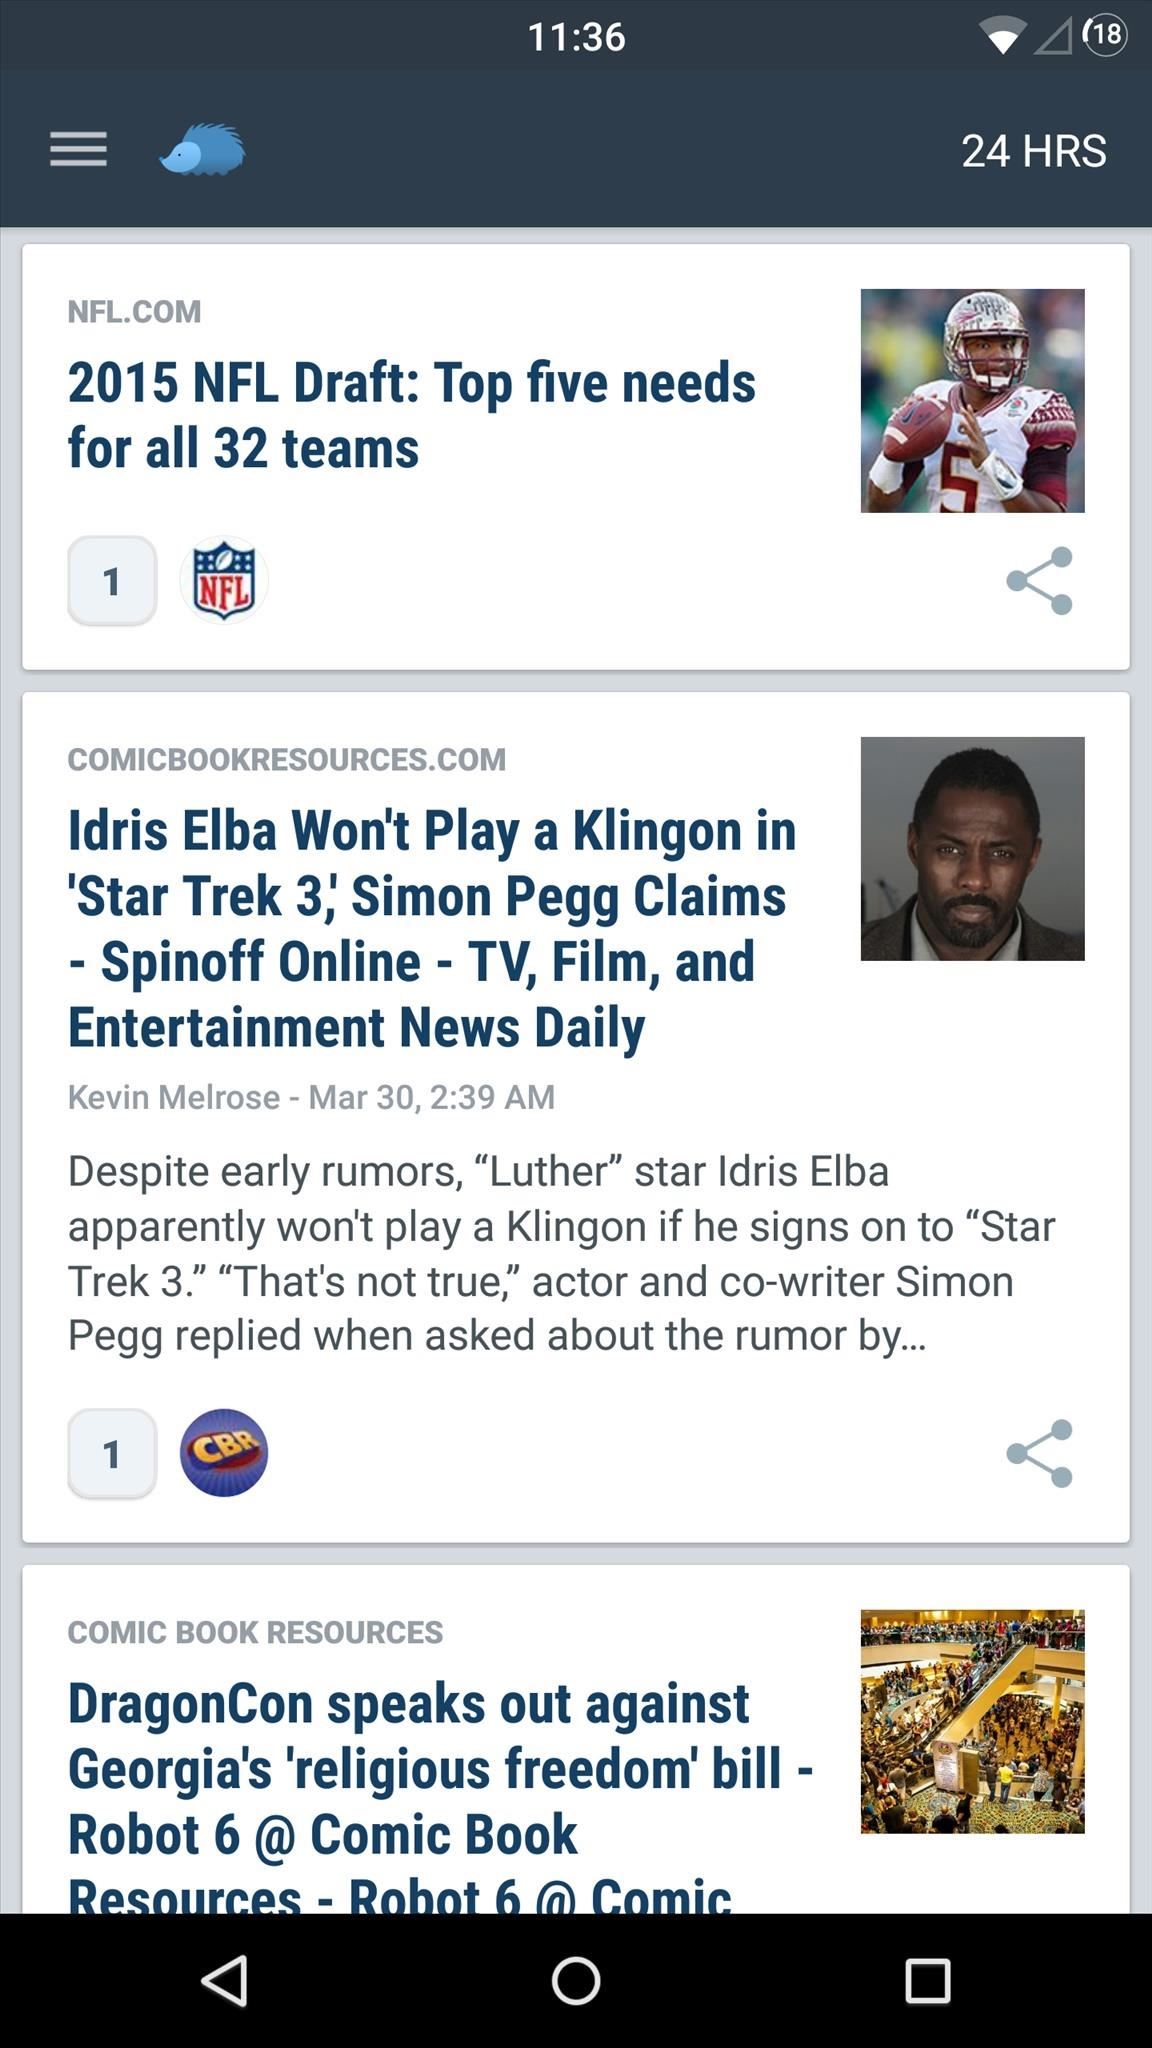 Combine Top News Stories Shared by Facebook & Twitter Friends into One Easy-to-Read Place